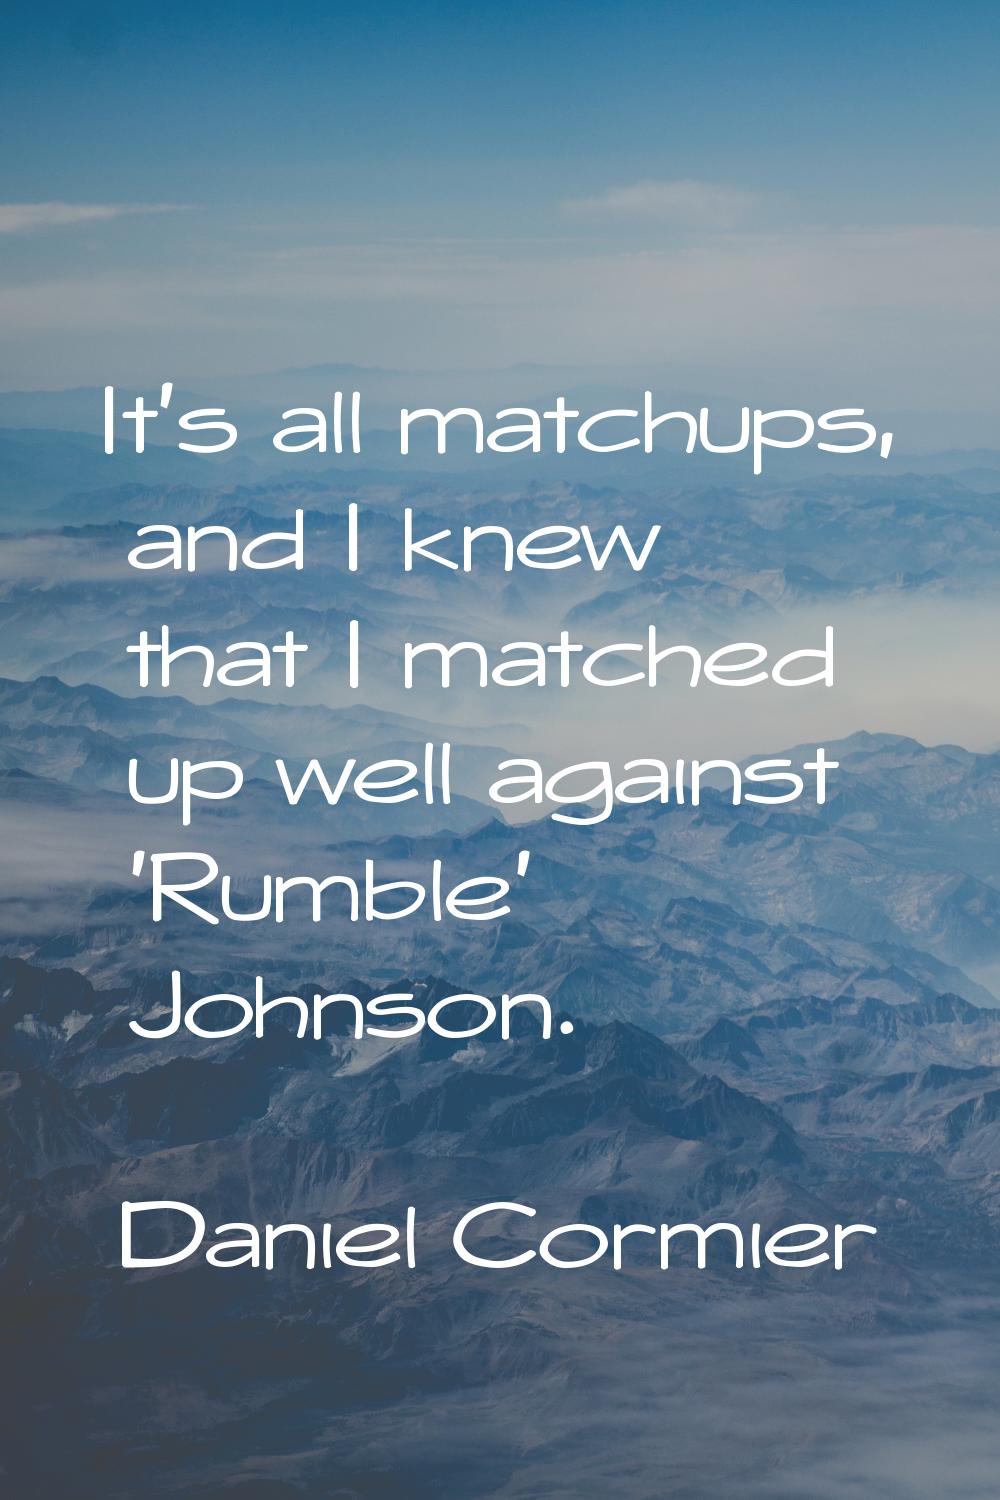 It's all matchups, and I knew that I matched up well against 'Rumble' Johnson.